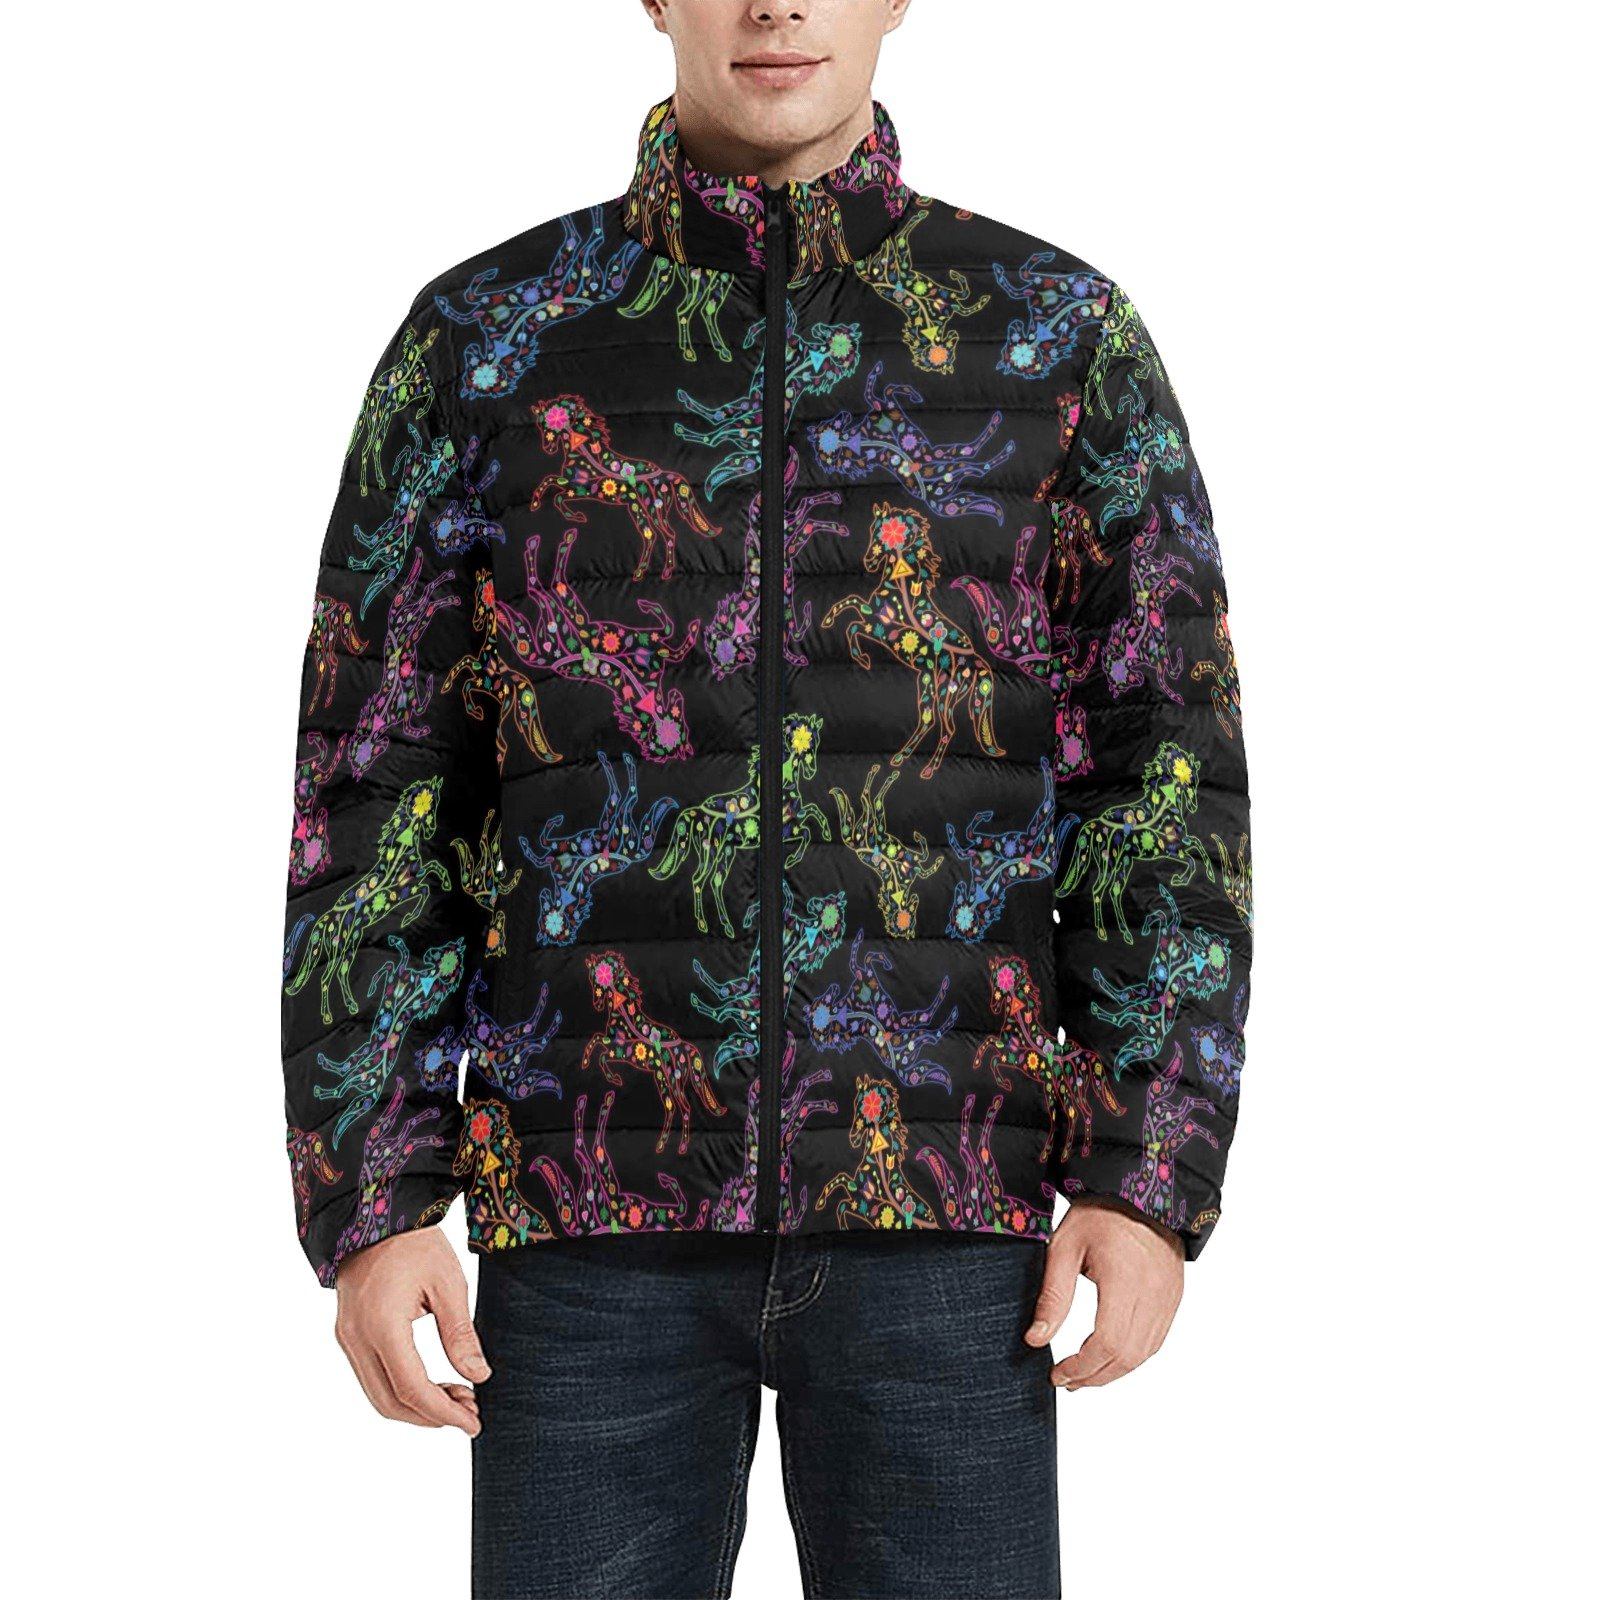 Floral Horse Men's Stand Collar Padded Jacket (Model H41) Men's Stand Collar Padded Jacket (H41) e-joyer 